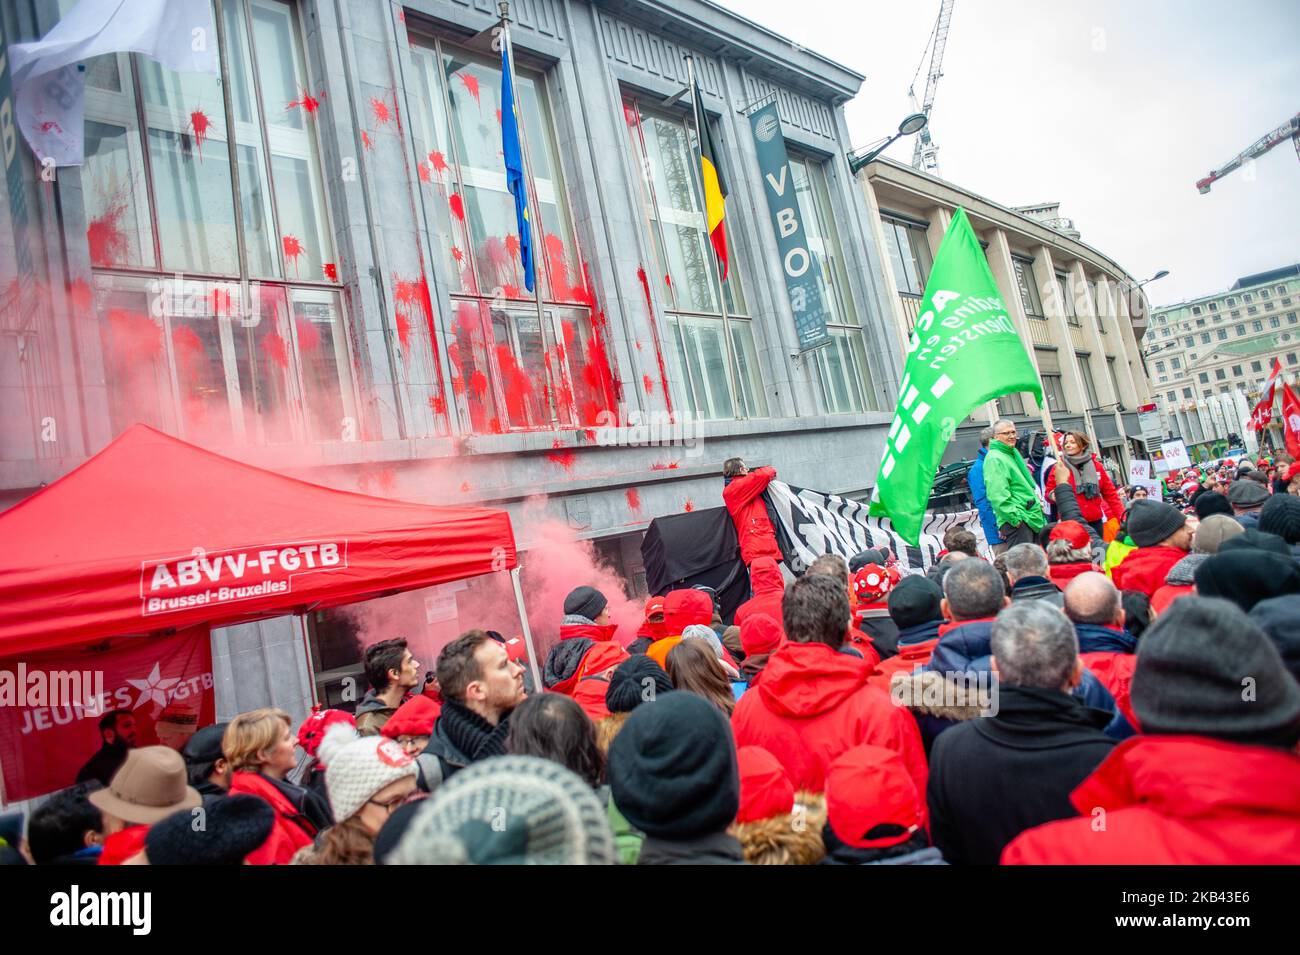 On December 14th, 2018 in Brussels, Belgium. The FGTB, CGSLB and CSC main trade unions have also called for nationwide protest movements to take place on December 14 to denounce the government economic policies. A rally of the joint trade union front was held at 11 am Friday outside of the FEB (Federation of Enterprises in Belgium) headquarters in the Belgian capital. Thousands of workers gathered to demand fair careers and decent pensions. Outside of the FEB (Federation of Enterprises in Belgium) the protesters thrown red paint and eggs to the building. With over 1.2 million members, the Gene Stock Photo